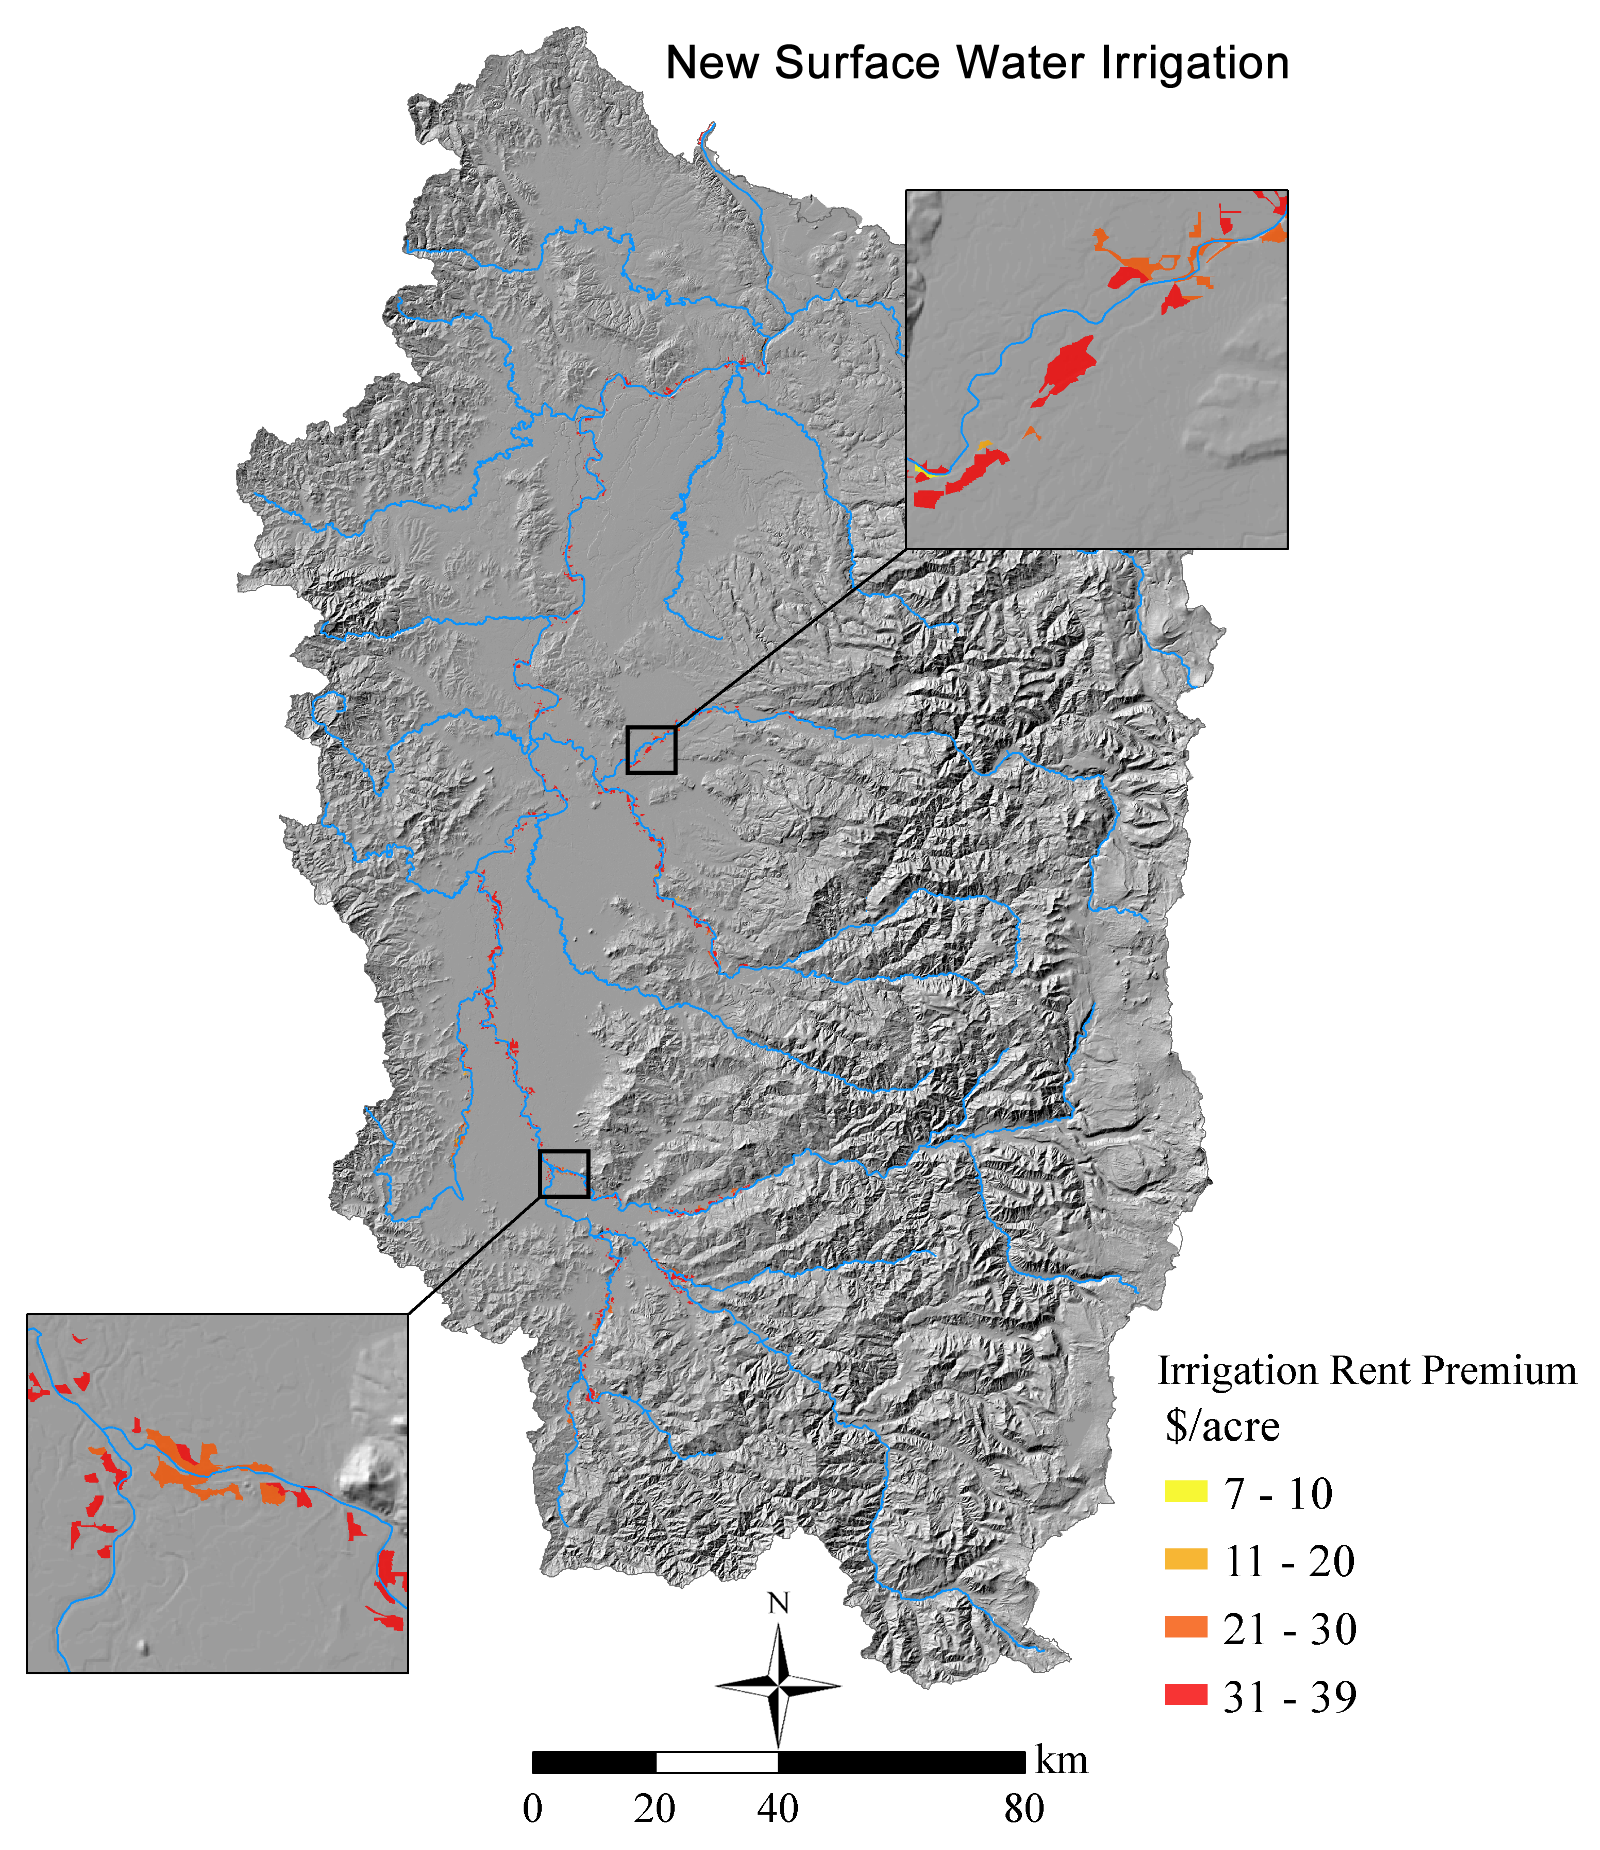 Locations of new irrigation water rights with low conveyance cost assumptions.